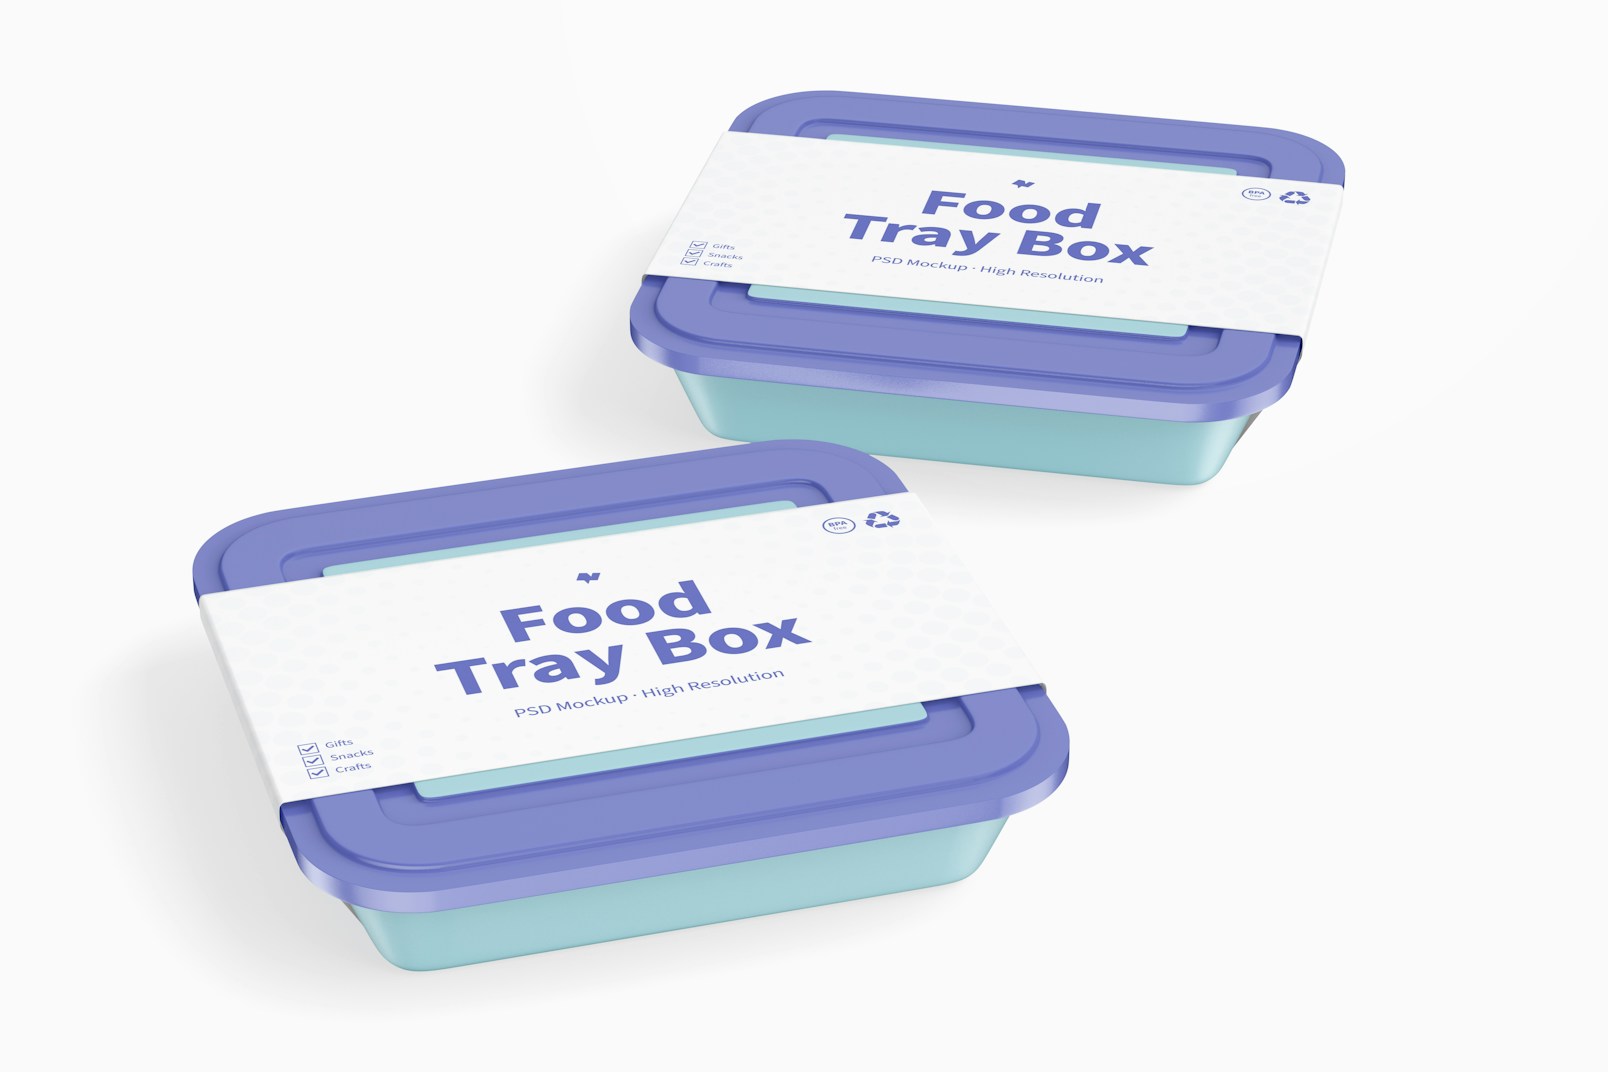 Food Tray Boxes with Lid Mockup, Perspective